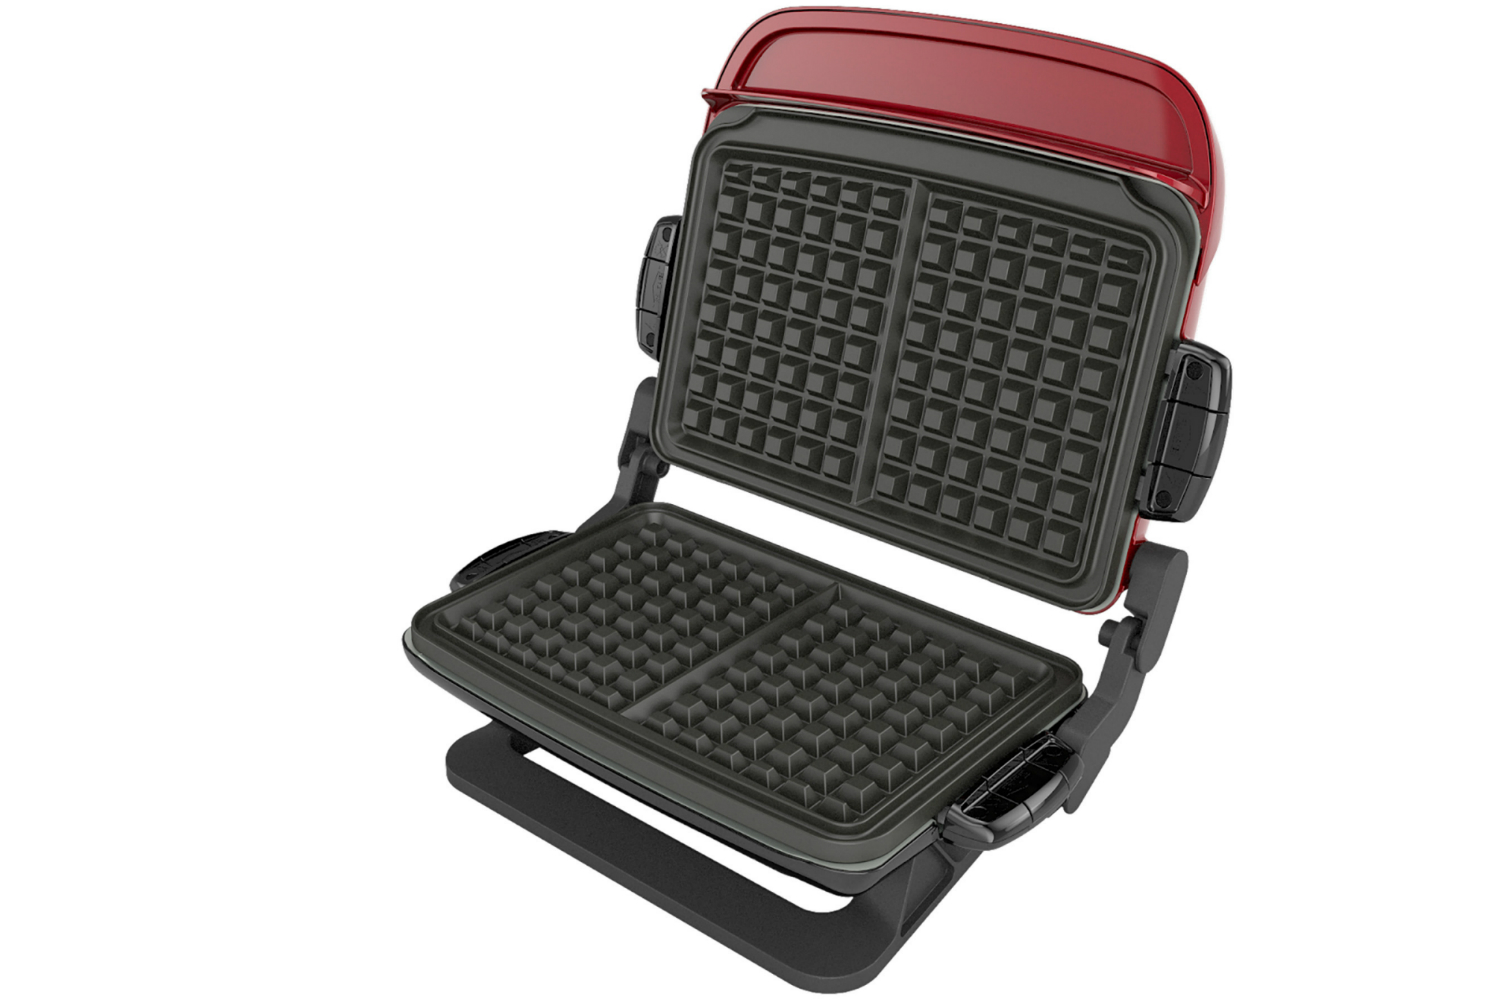 https://www.digitaltrends.com/wp-content/uploads/2019/05/george-foreman-evolve-5-serving-multi-plate-grill-system-electric-indoor-grill-with-ceramic-plates-and-waffle-plates-3.jpg?resize=1500%2C1000&p=1